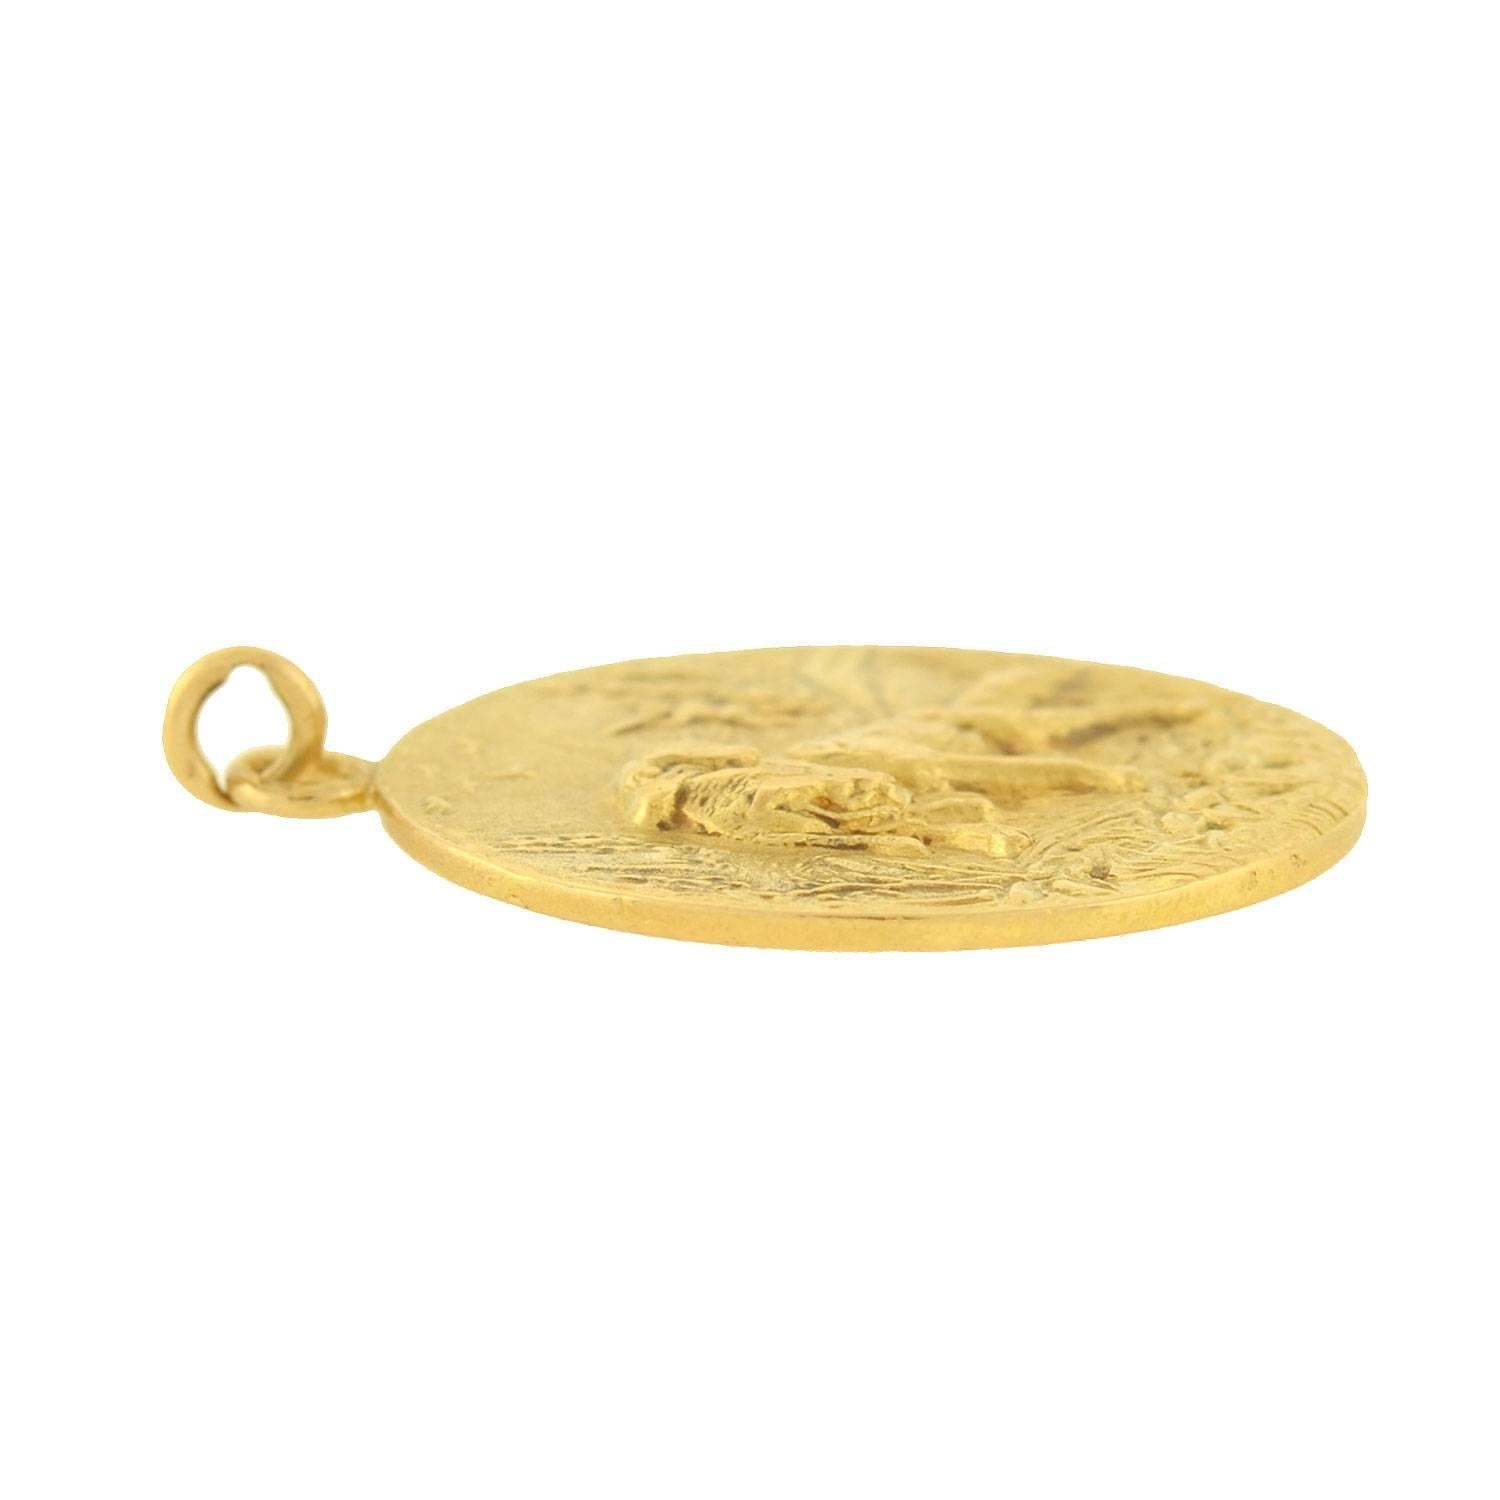 Women's or Men's Cartier Edwardian Gold Disc Pendant with Hunting Dog Motif